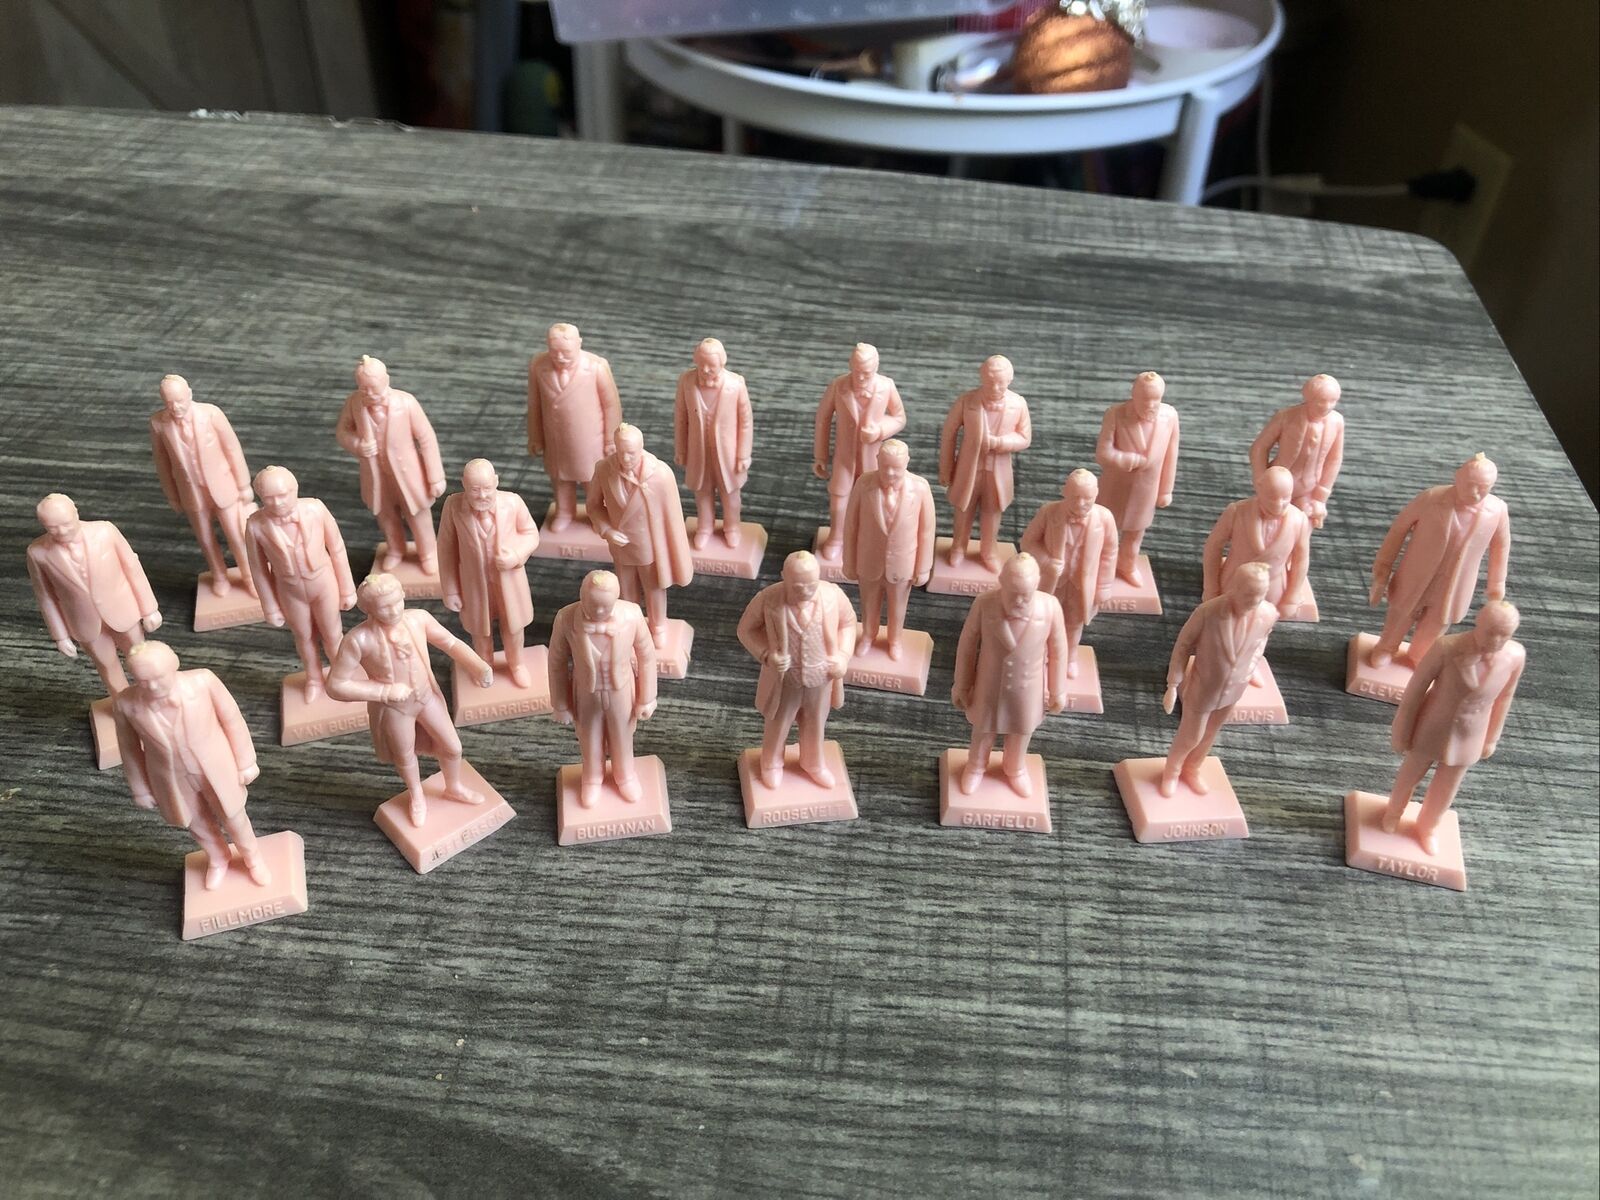 The Presidents Of The United States Vintage Figurines. Lot Of 23 Figurines.